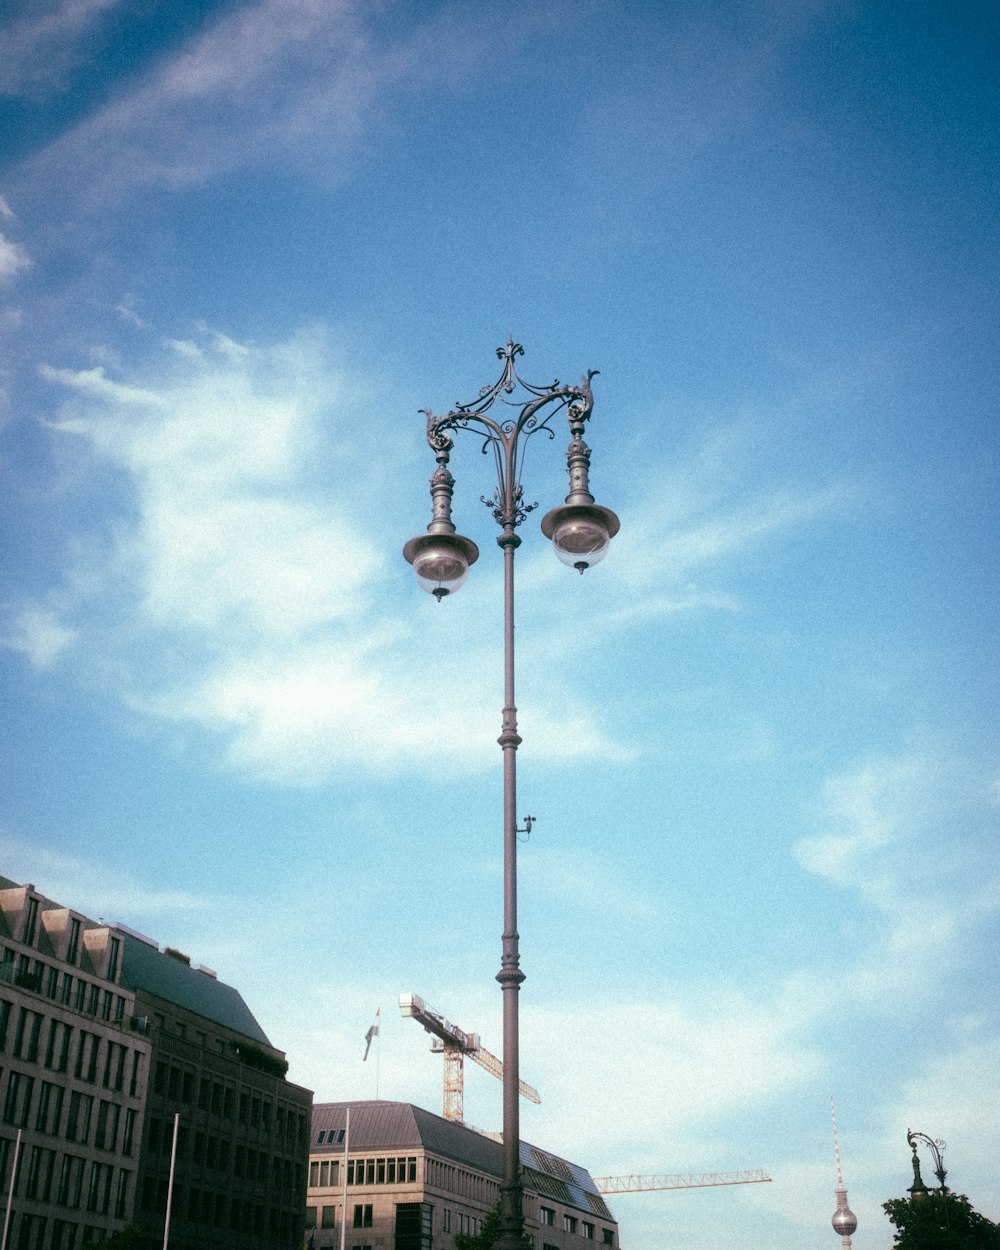 a street light on a pole in front of a building